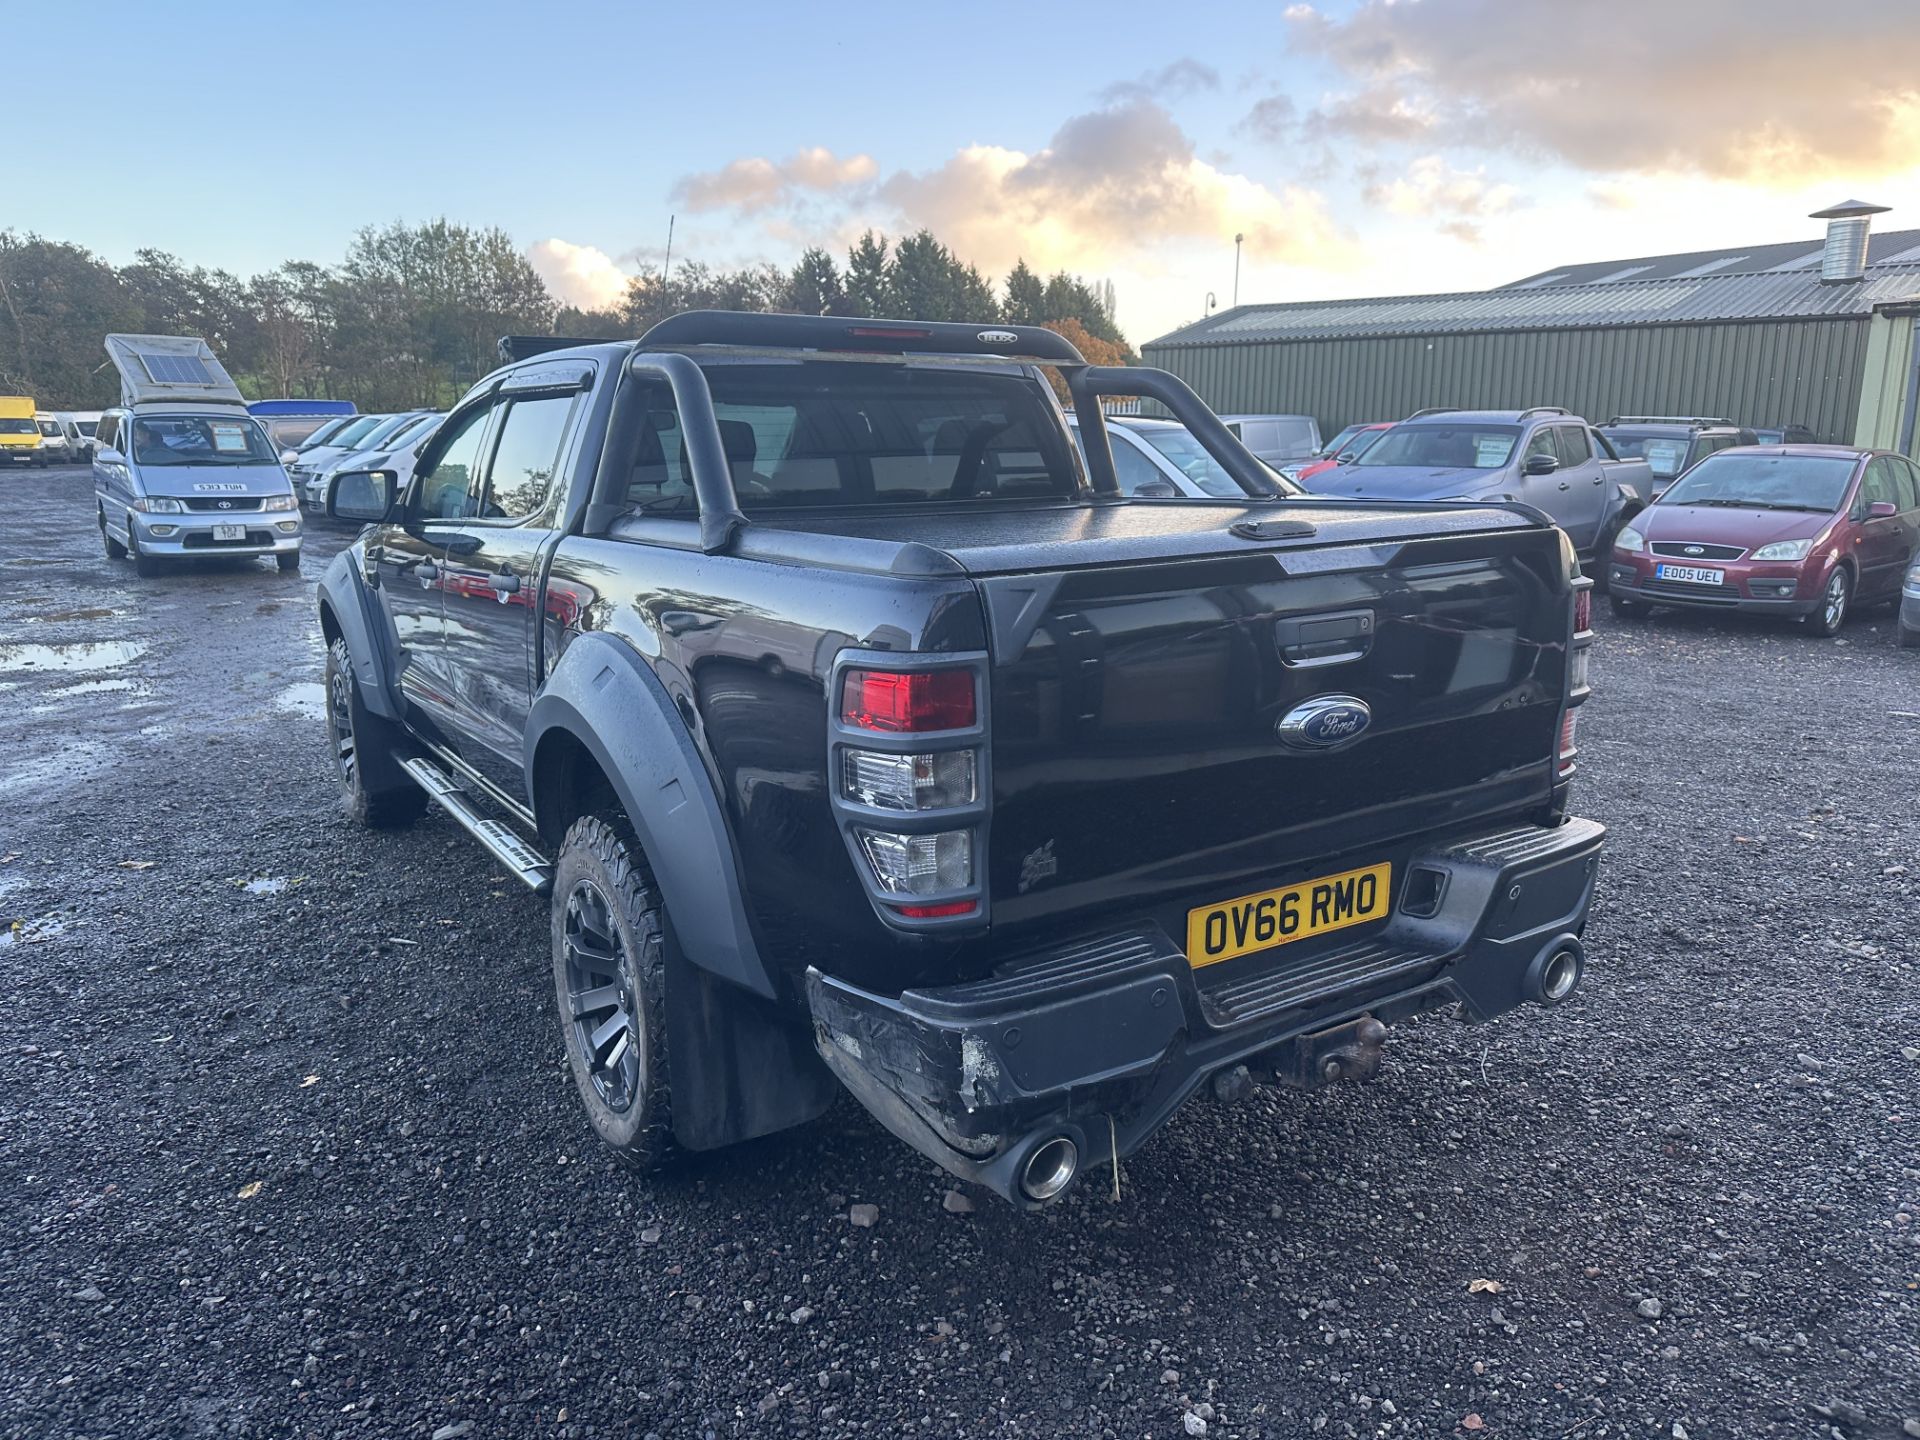 OV66RMO Model: 66 PLATE FORD RANGER LIMITED MSRT 4X4 3.2 TDCI AUTOMATIC - Image 16 of 23